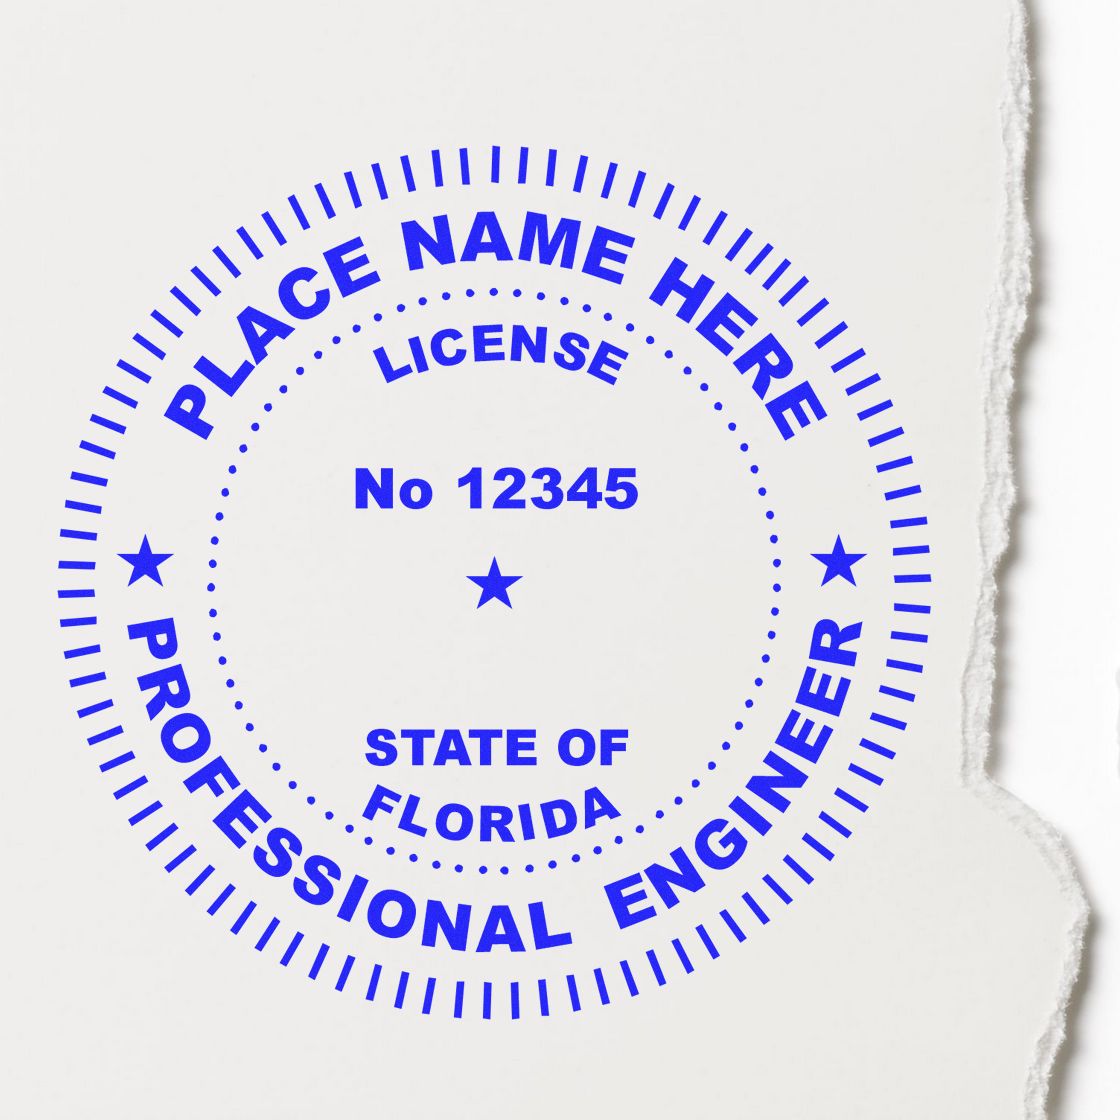 The Slim Pre-Inked Florida Professional Engineer Seal Stamp stamp impression comes to life with a crisp, detailed photo on paper - showcasing true professional quality.